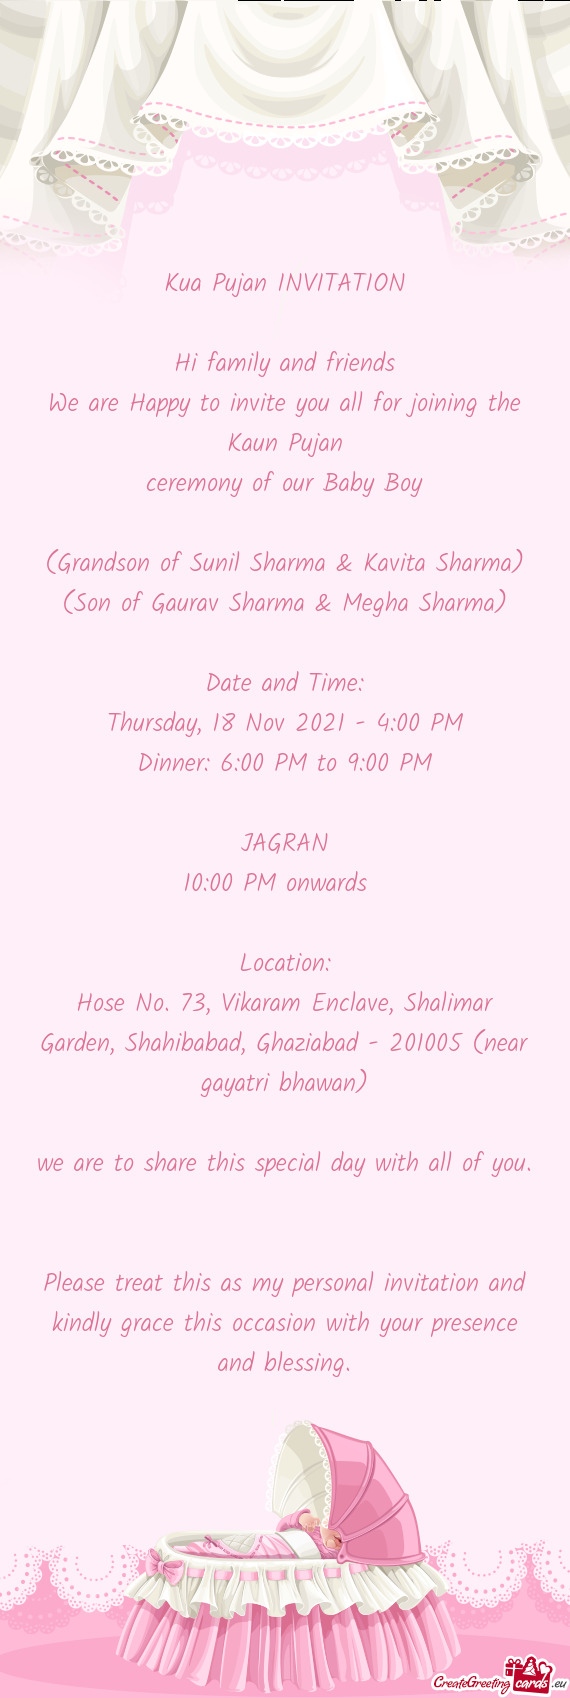 We are Happy to invite you all for joining the Kaun Pujan